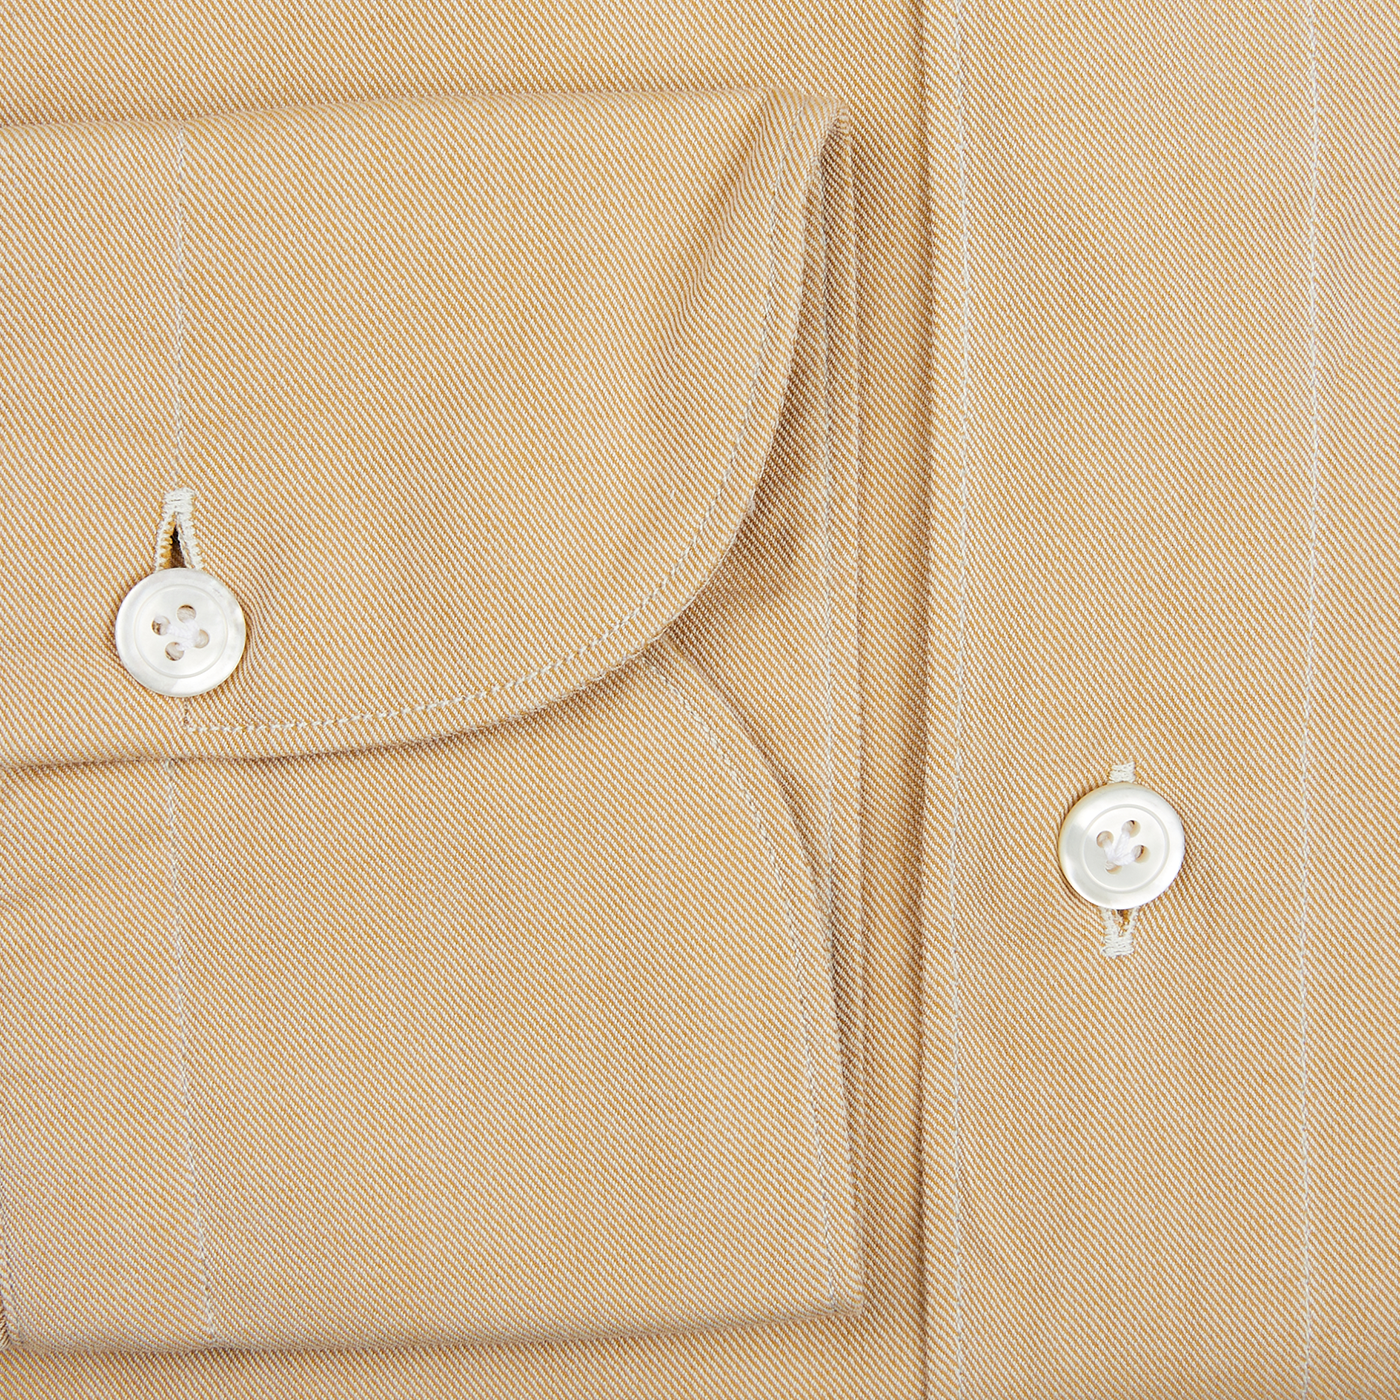 A close up of a handmade Sand Beige Washed Cotton Twill shirt from Finamore.